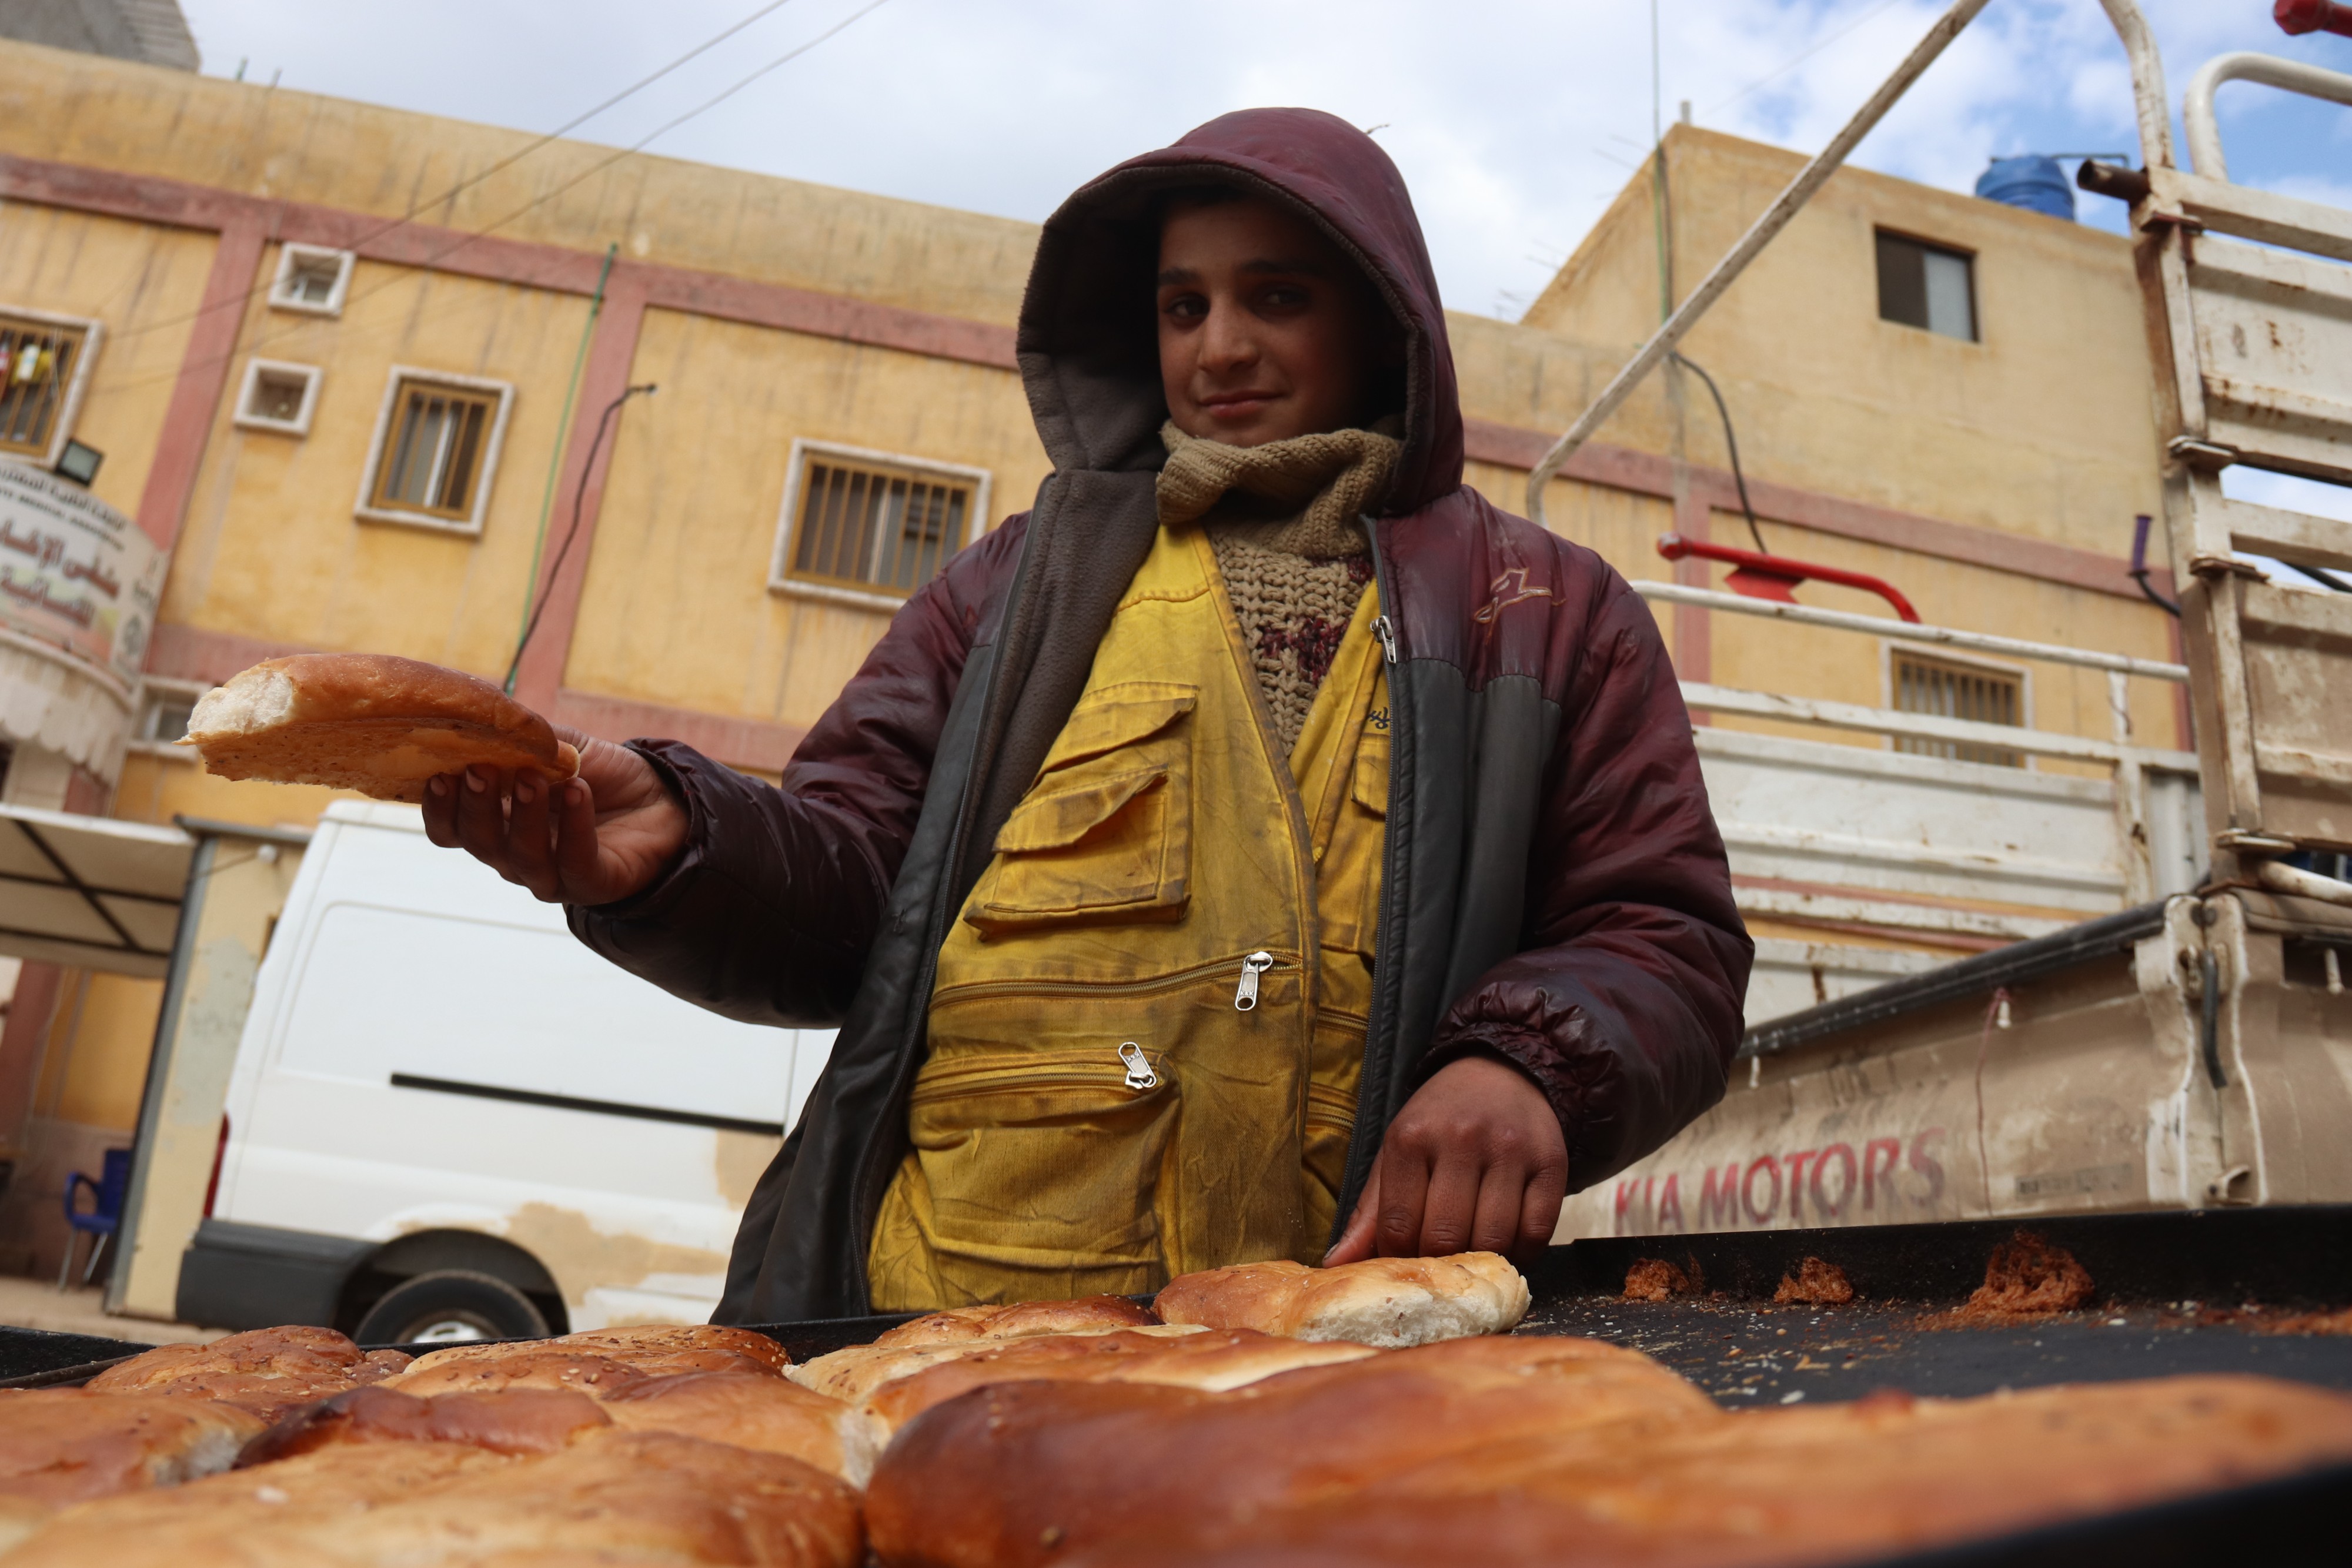 Muhammad, 14, would love to be an architect someday. For now, he sells pastries as his family's only earner (MEE/Muhammad Al Hosse)